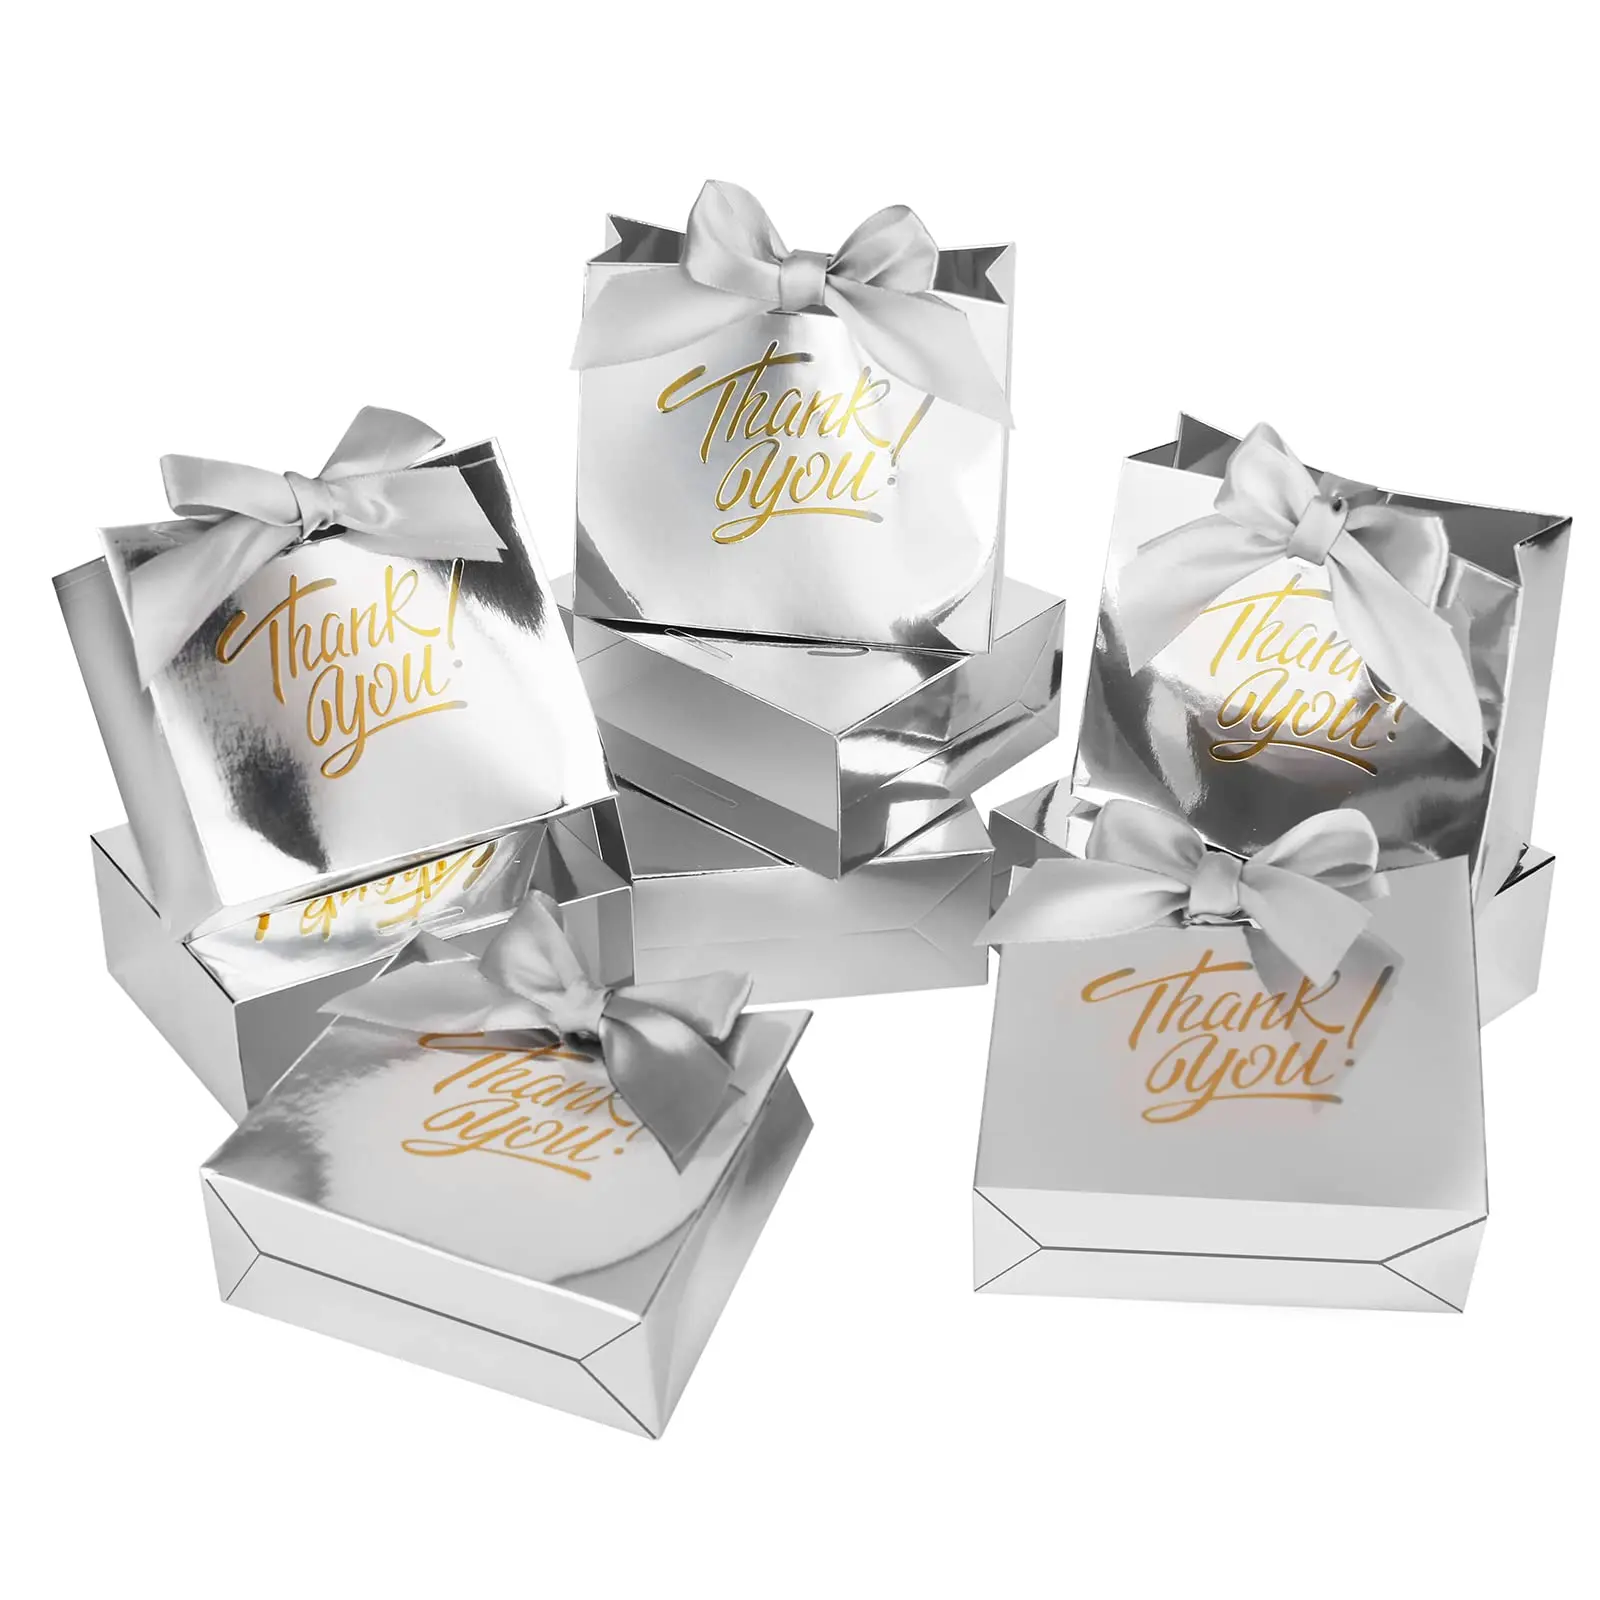 Wholesale Luxury Small Thank You Bags Mini Gift Bags for Wedding Baby Shower Bridal Business Party Supplies